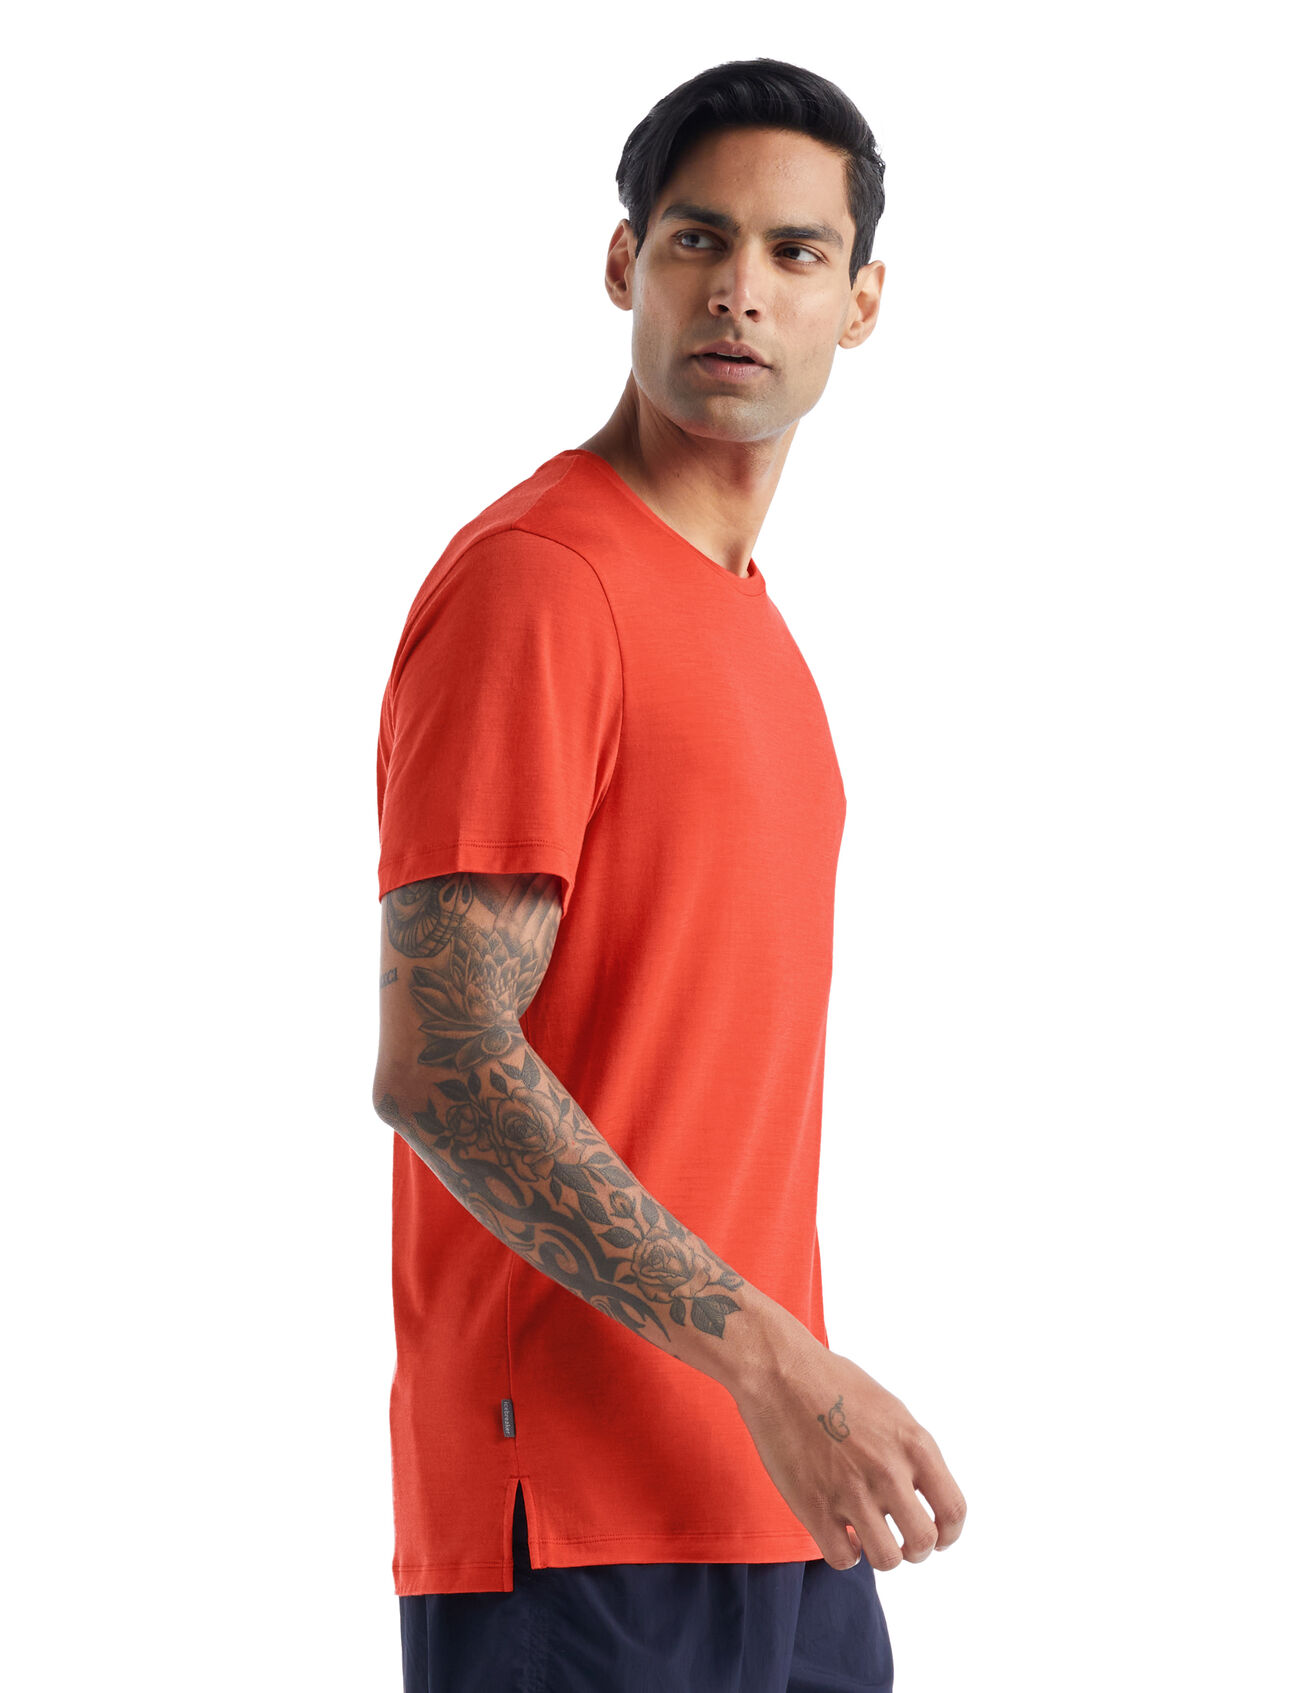 Mens Merino Sphere II Short Sleeve T-Shirt A soft merino-blend tee made with our lightweight Cool-Lite™ jersey fabric, the Sphere II Short Sleeve Tee provides natural breathability, odor resistance and comfort.